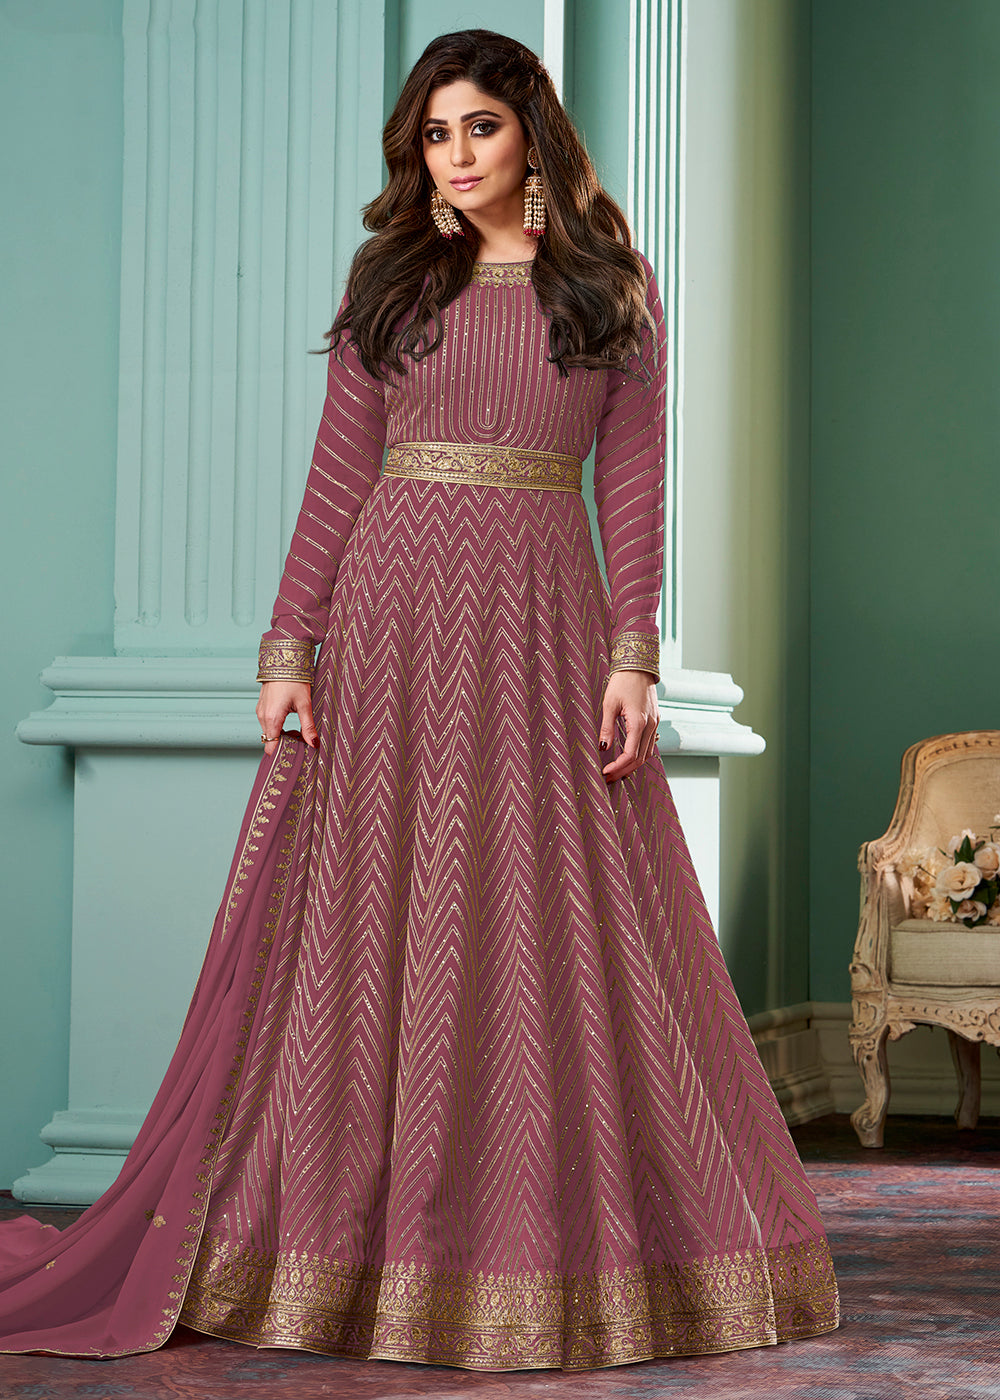 Shop Now Baby Pink Belt Style Anarkali Gown Online featuring Shamita Shetty at  Empress Clothing in USA.